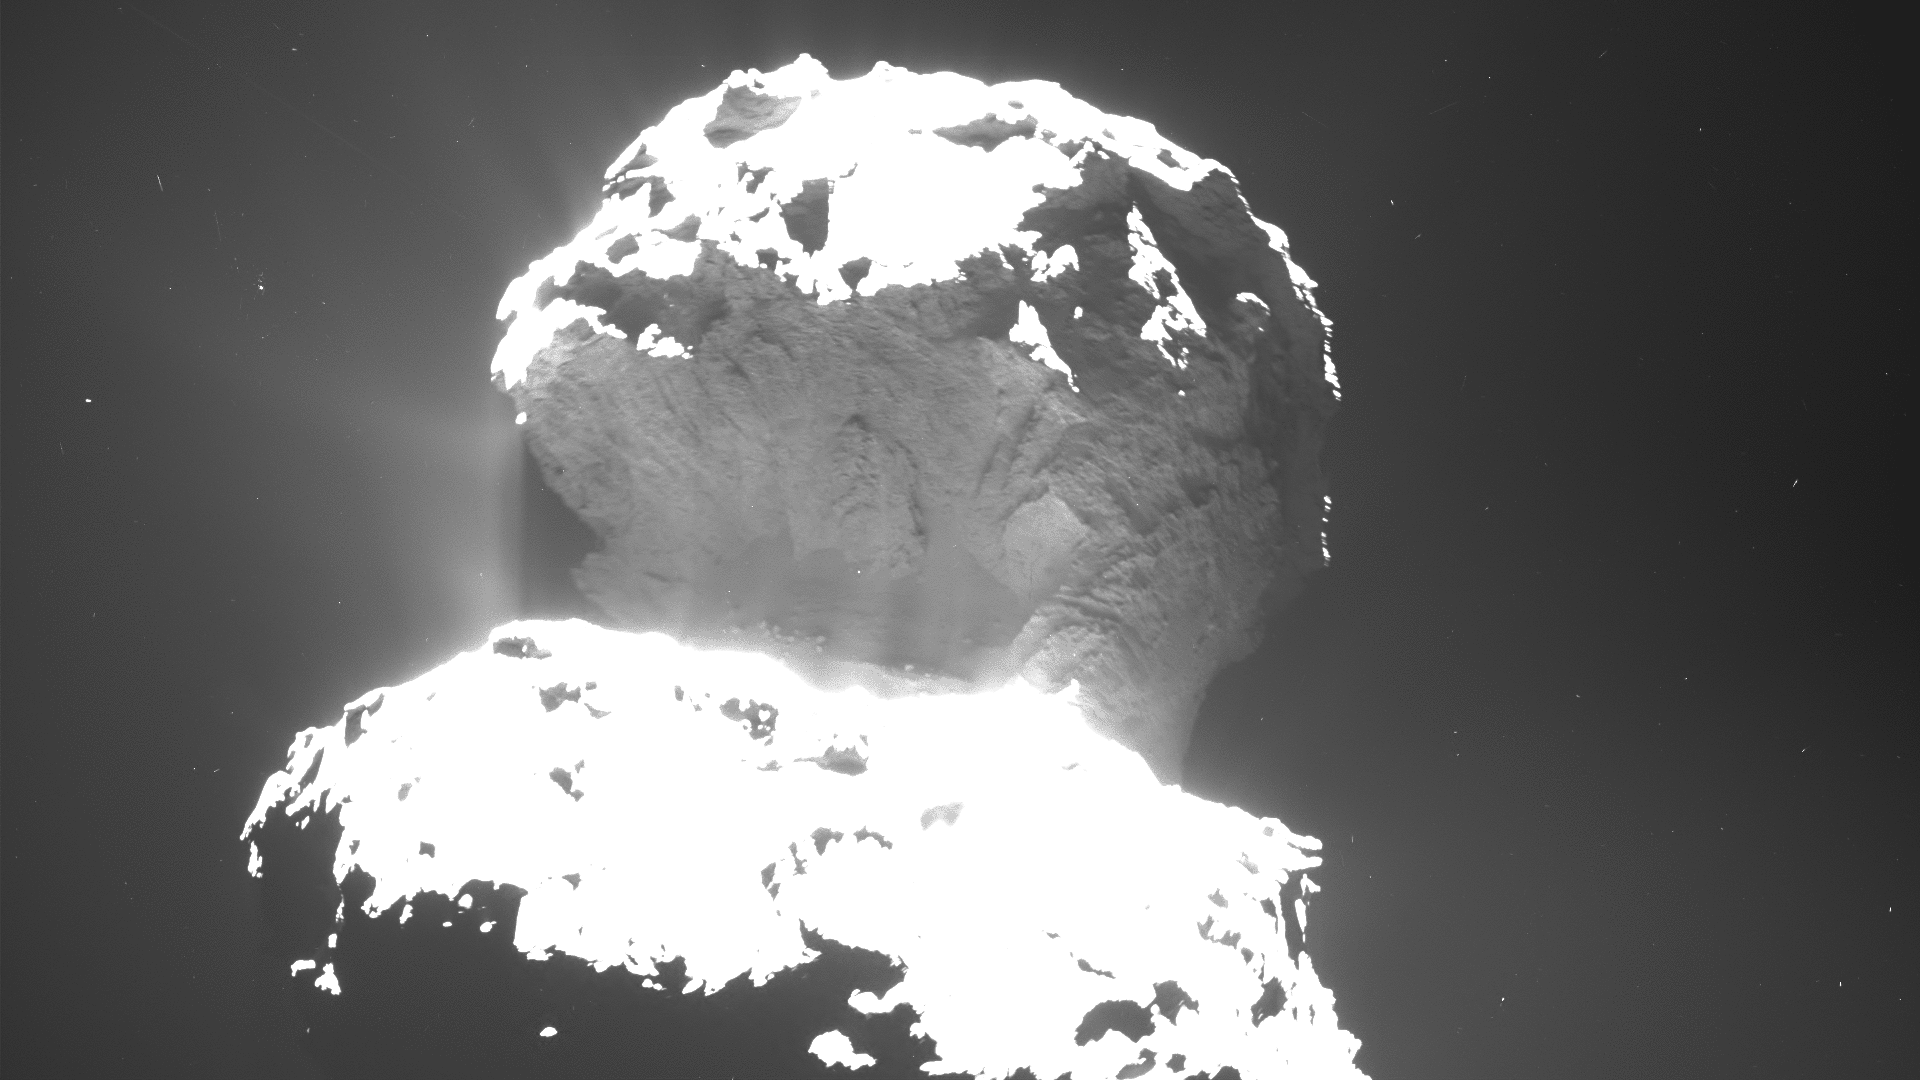 Rotating comet's jets